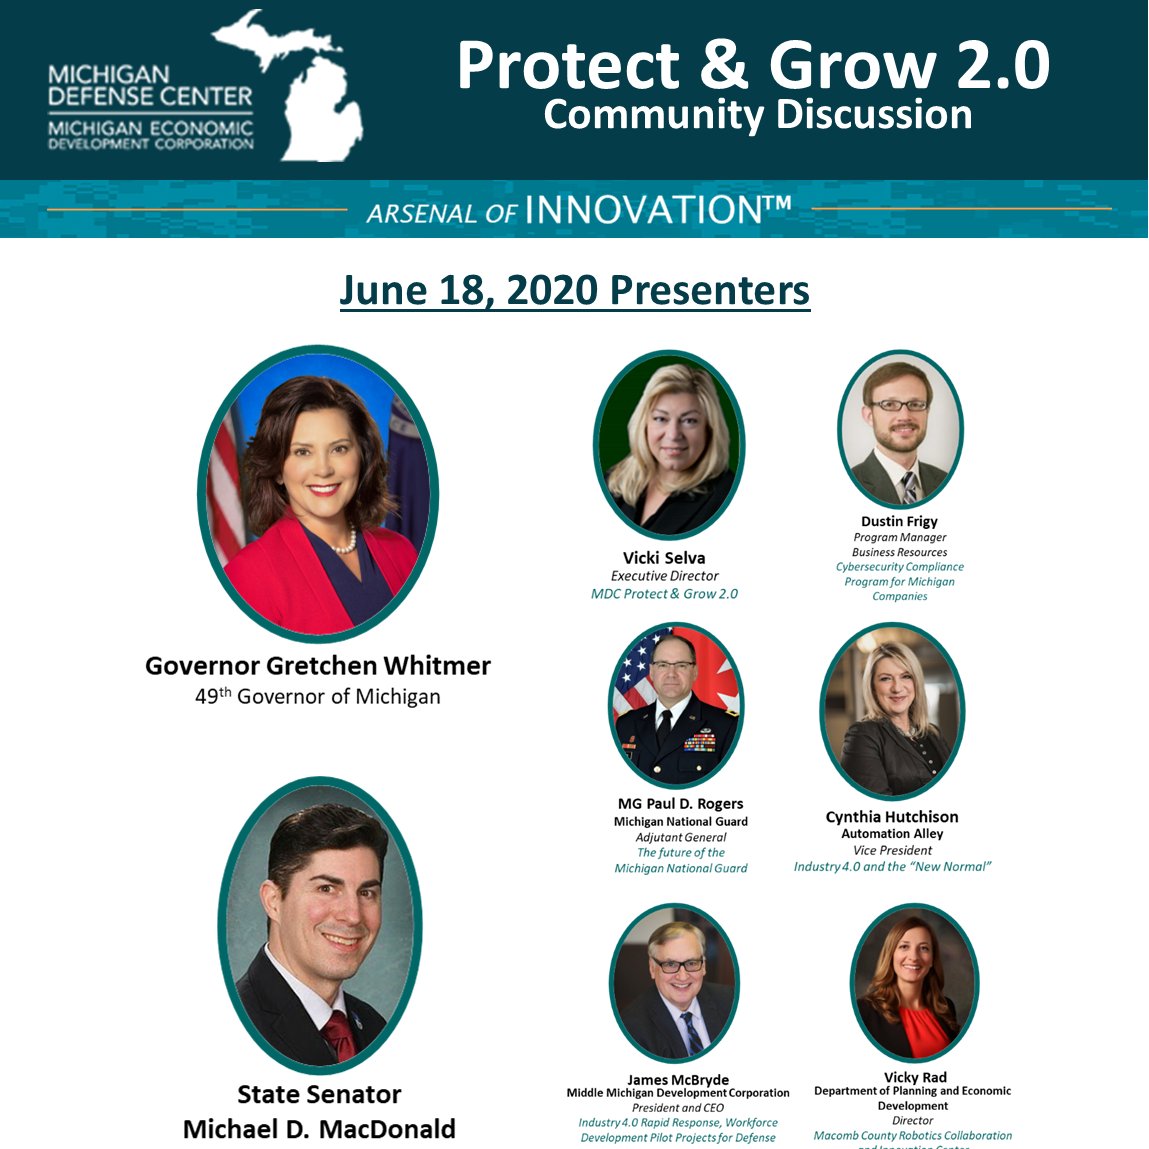 The MDC would like to thank Governor Gretchen Whitmer and Senator Michael MacDonald for their support of the Defense Industry here in Michigan. With over 130 participants registered for the event, we were able to have a successful discussion. #ProtectandGrow